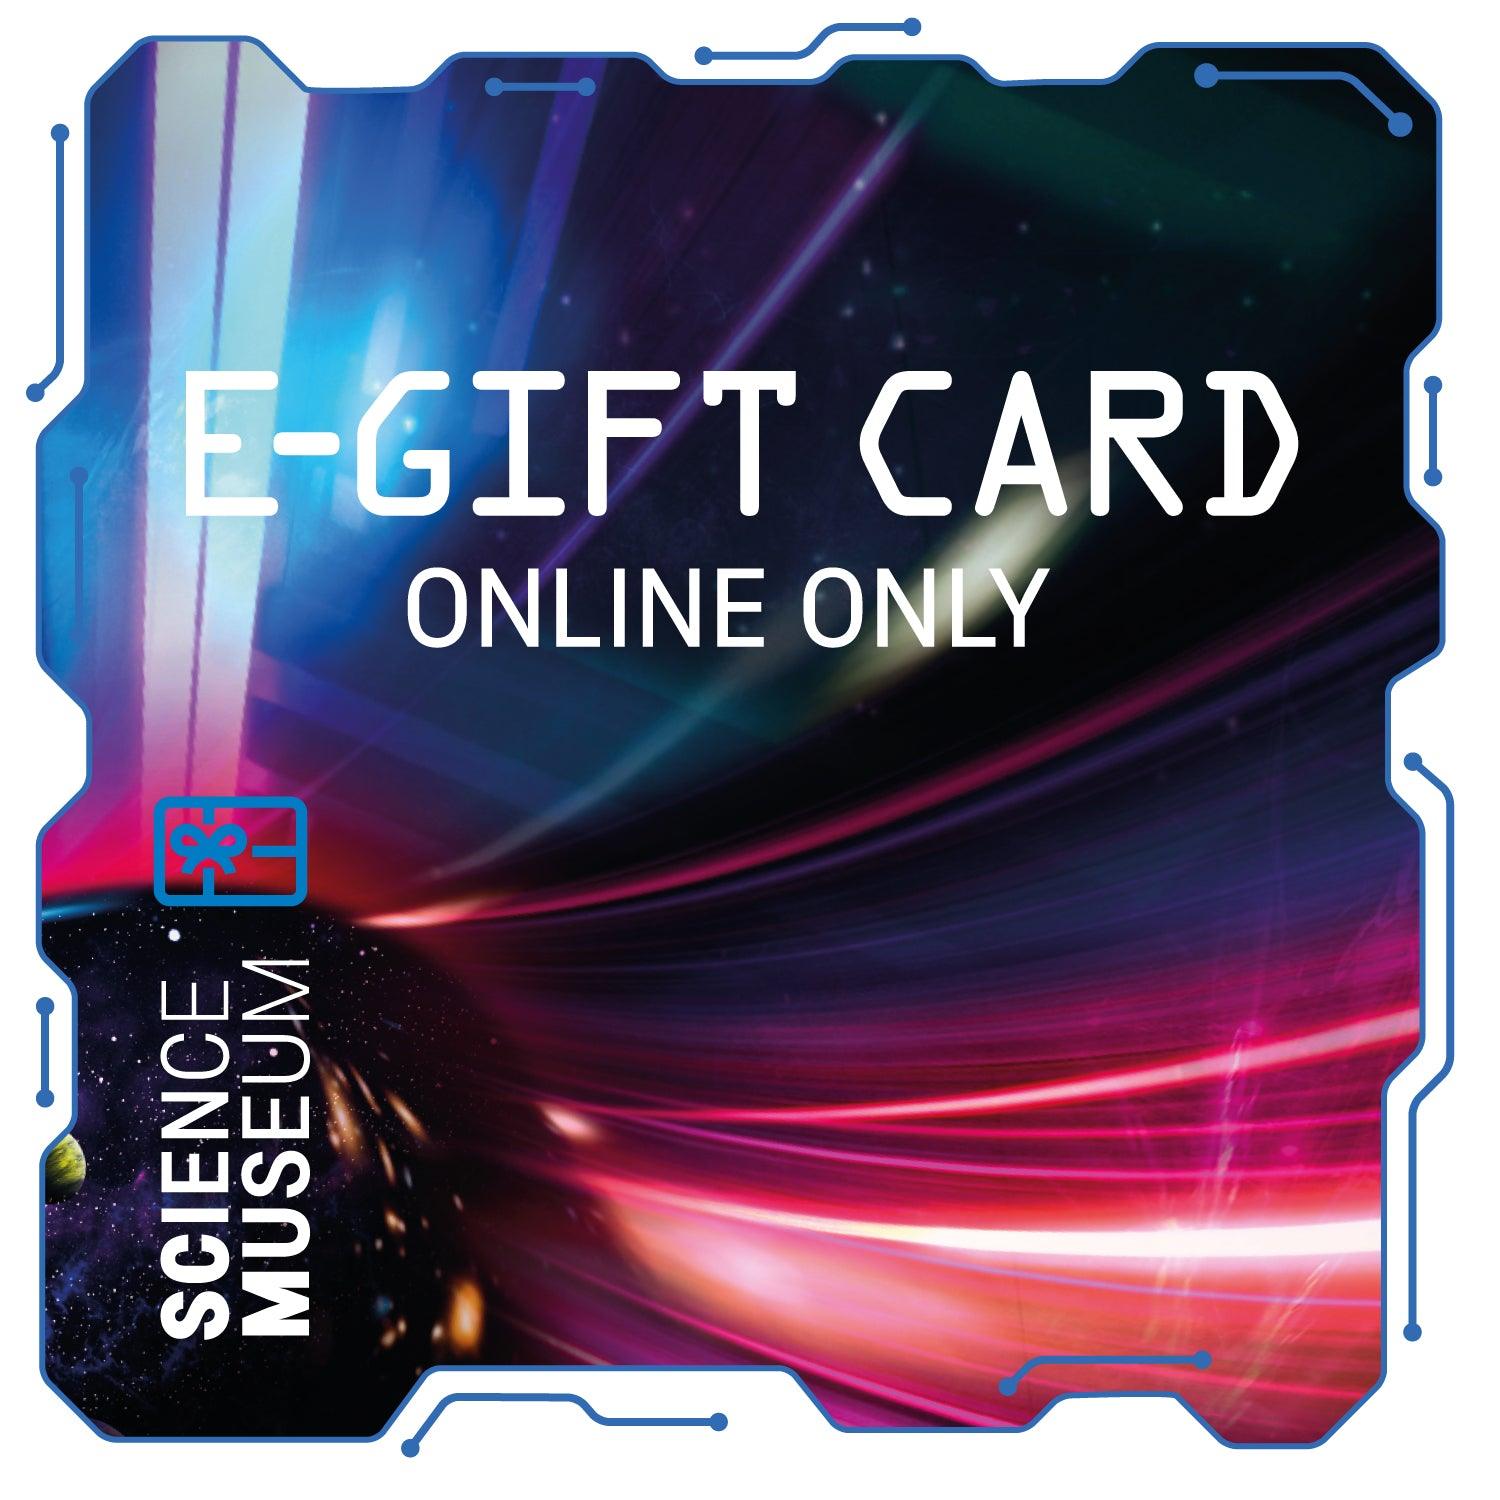 Science Museum E-Gift Card - Sub Group without Reference - Science Museum Shop